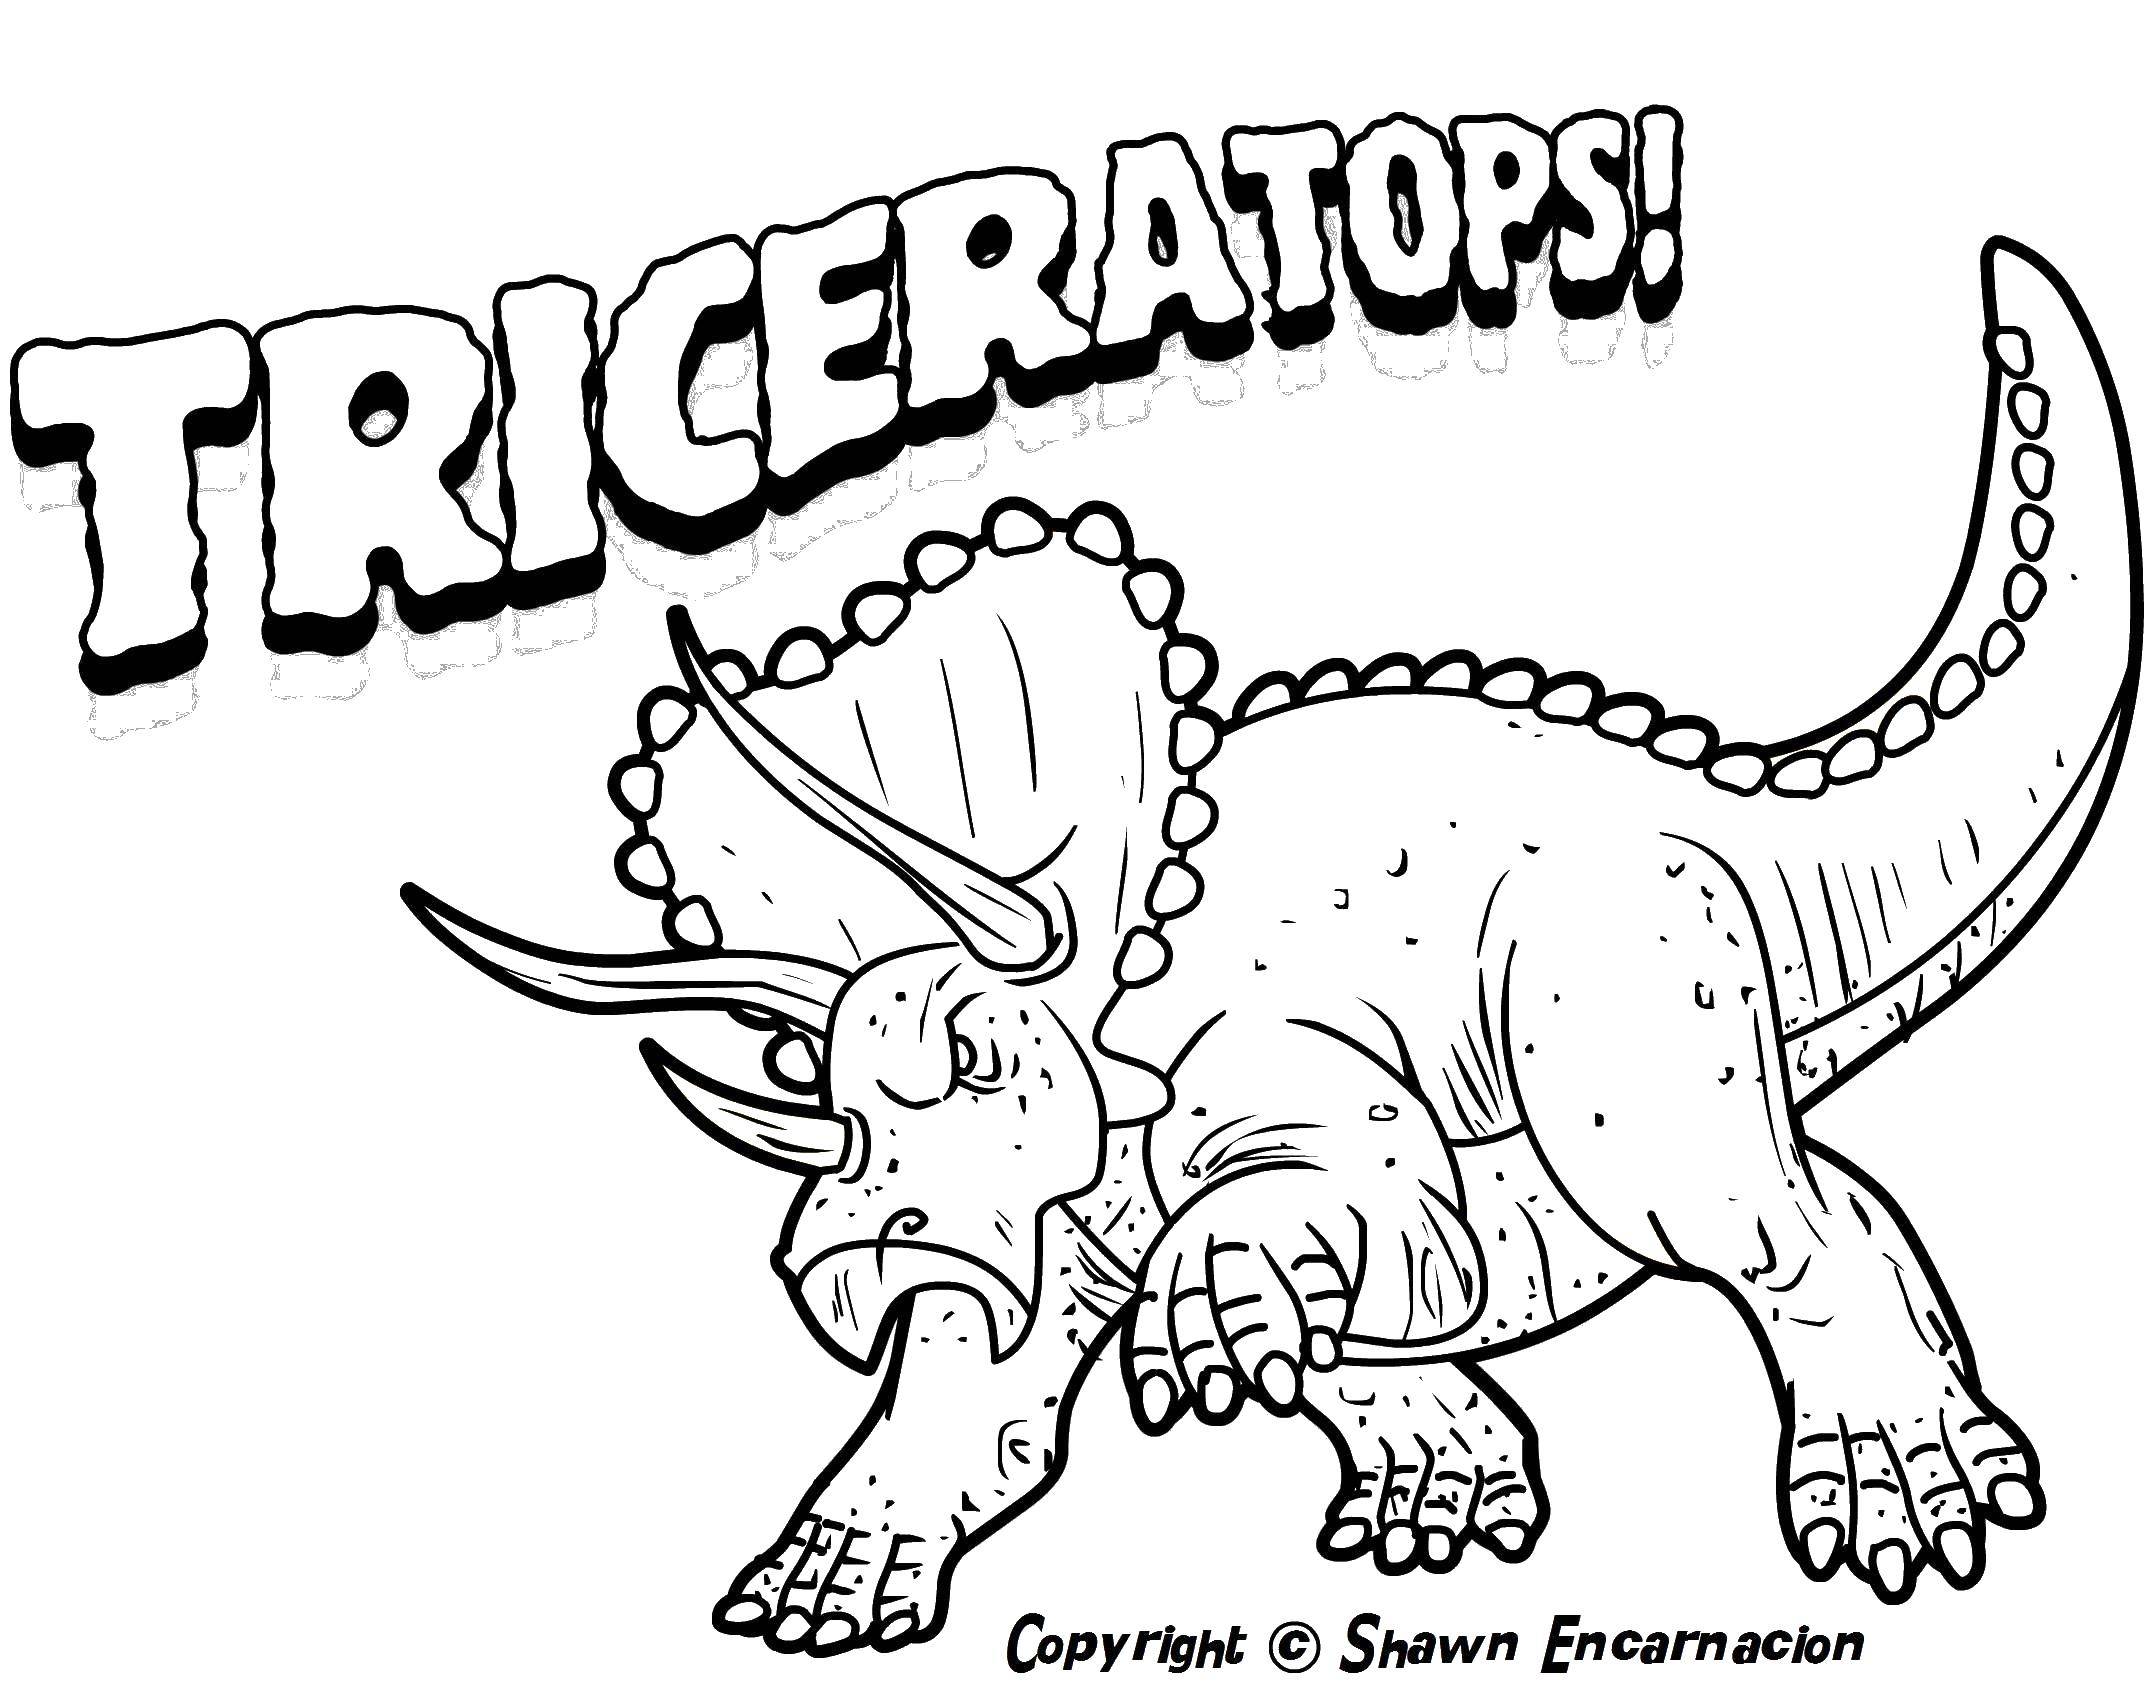 Coloring Triceratops. Category dinosaur. Tags:  Dinosaurs.